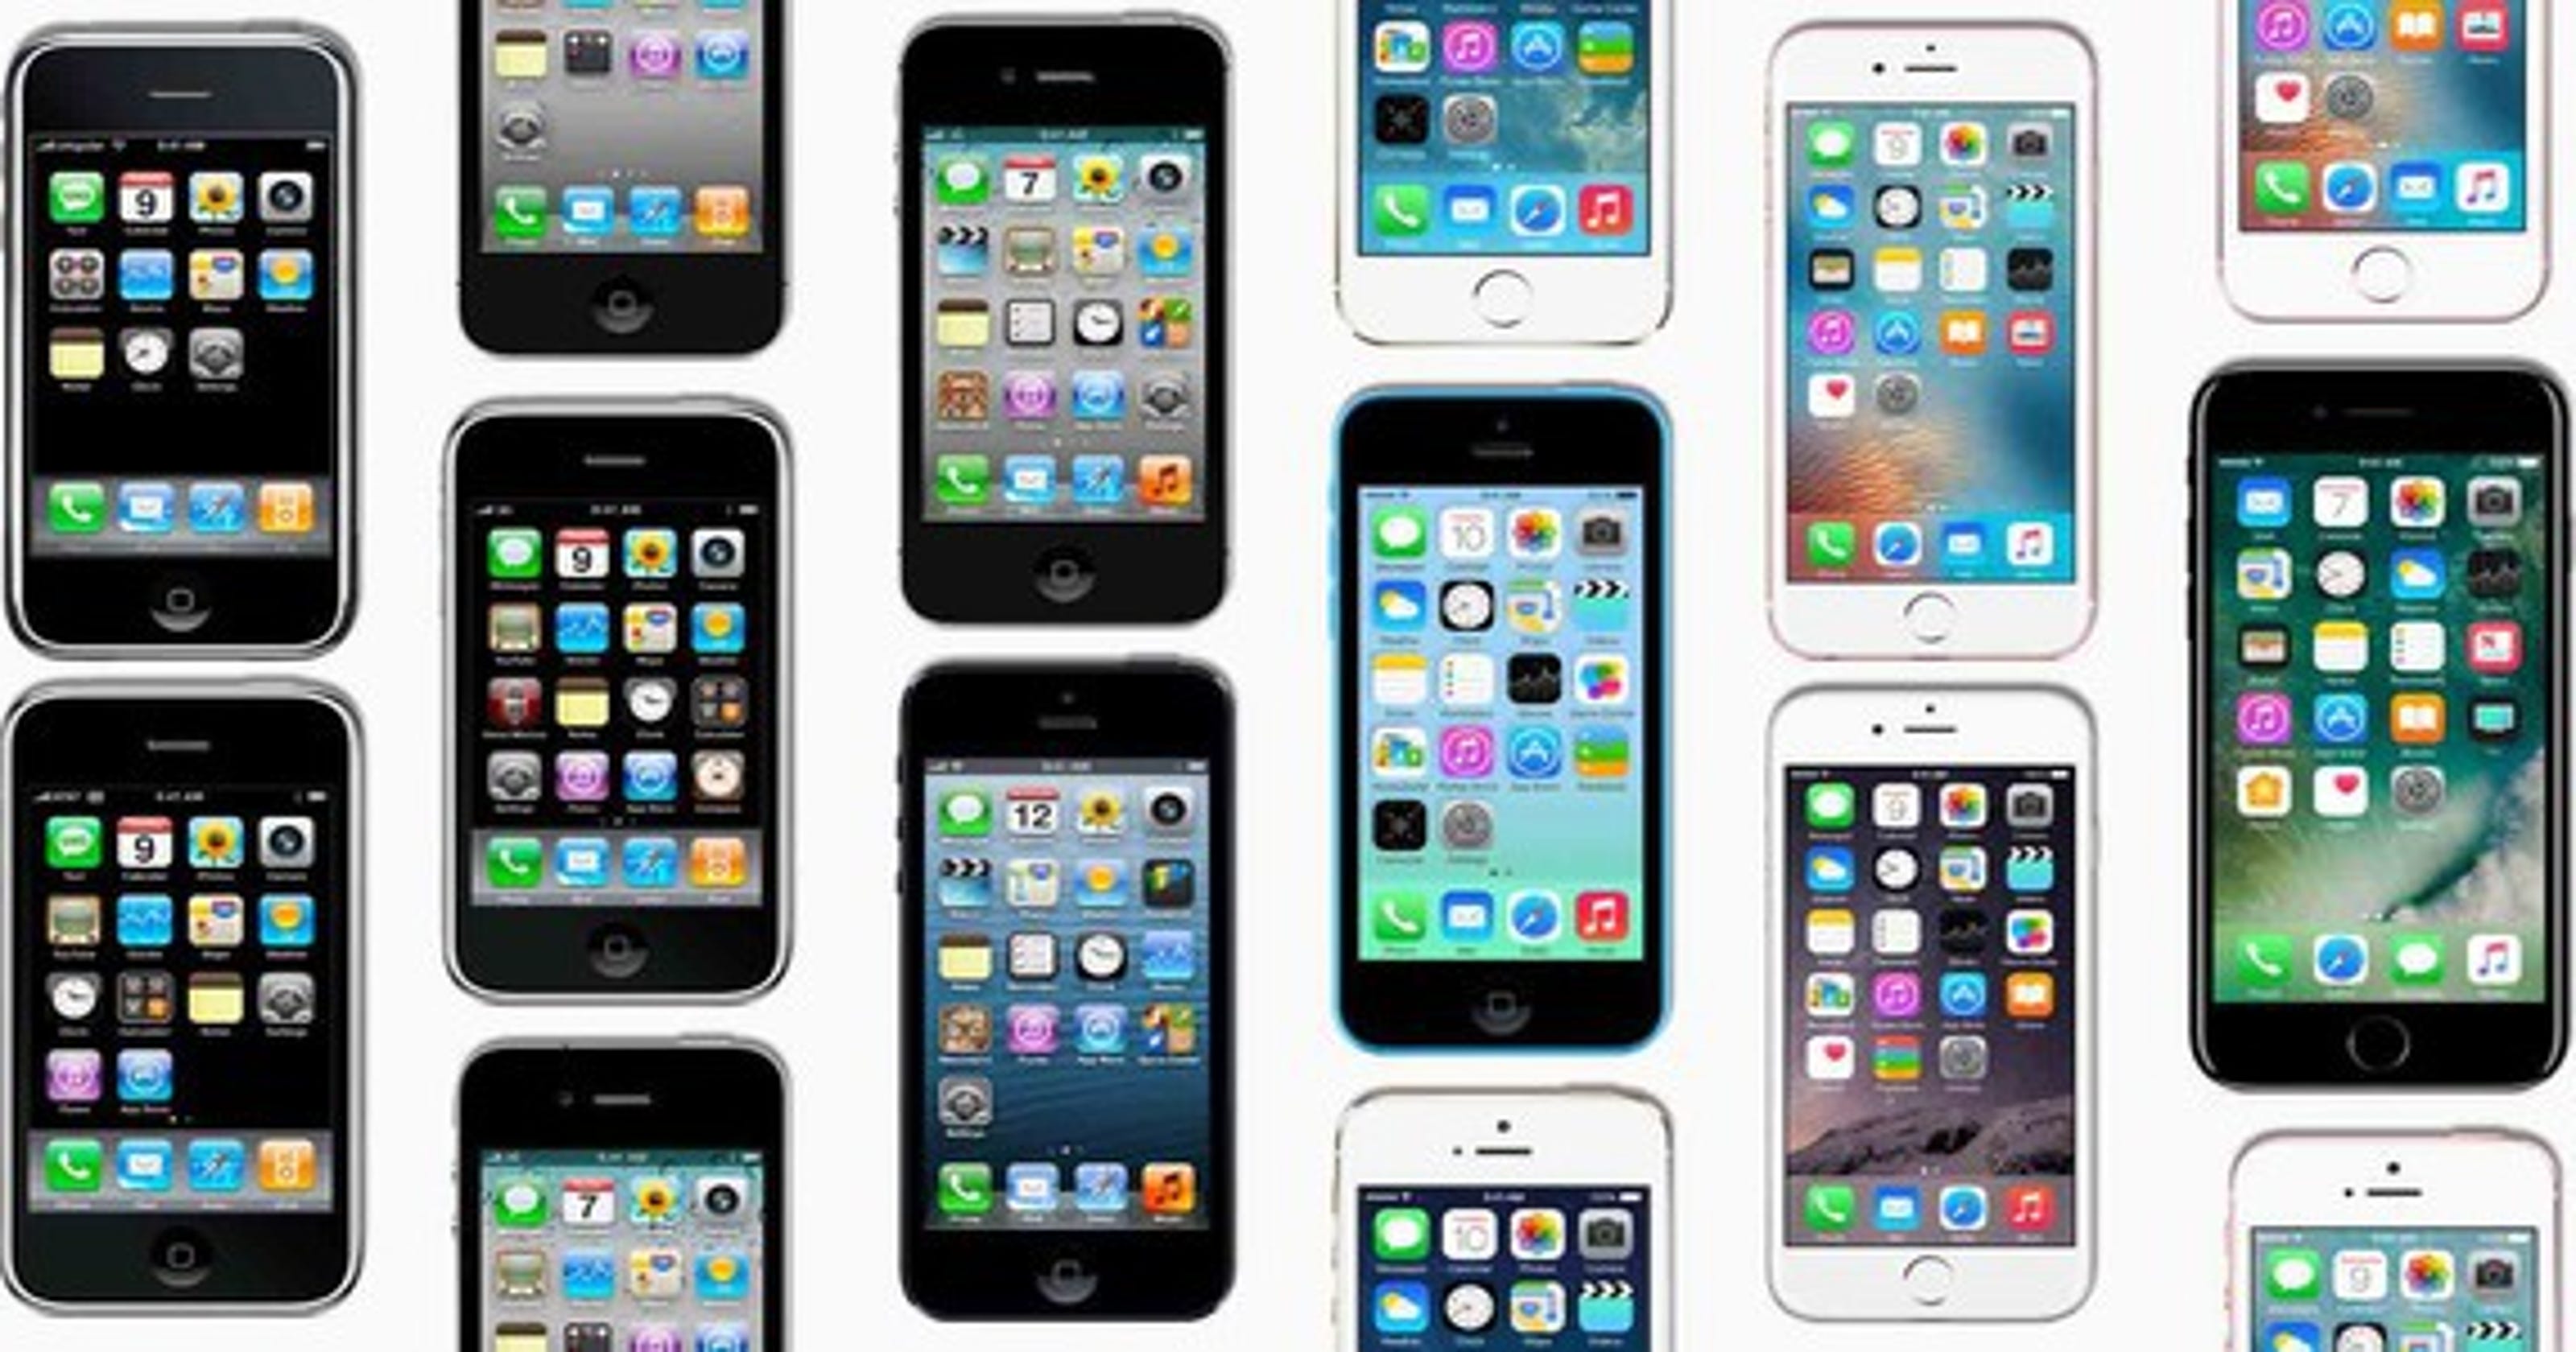 Apple iPhone A guide to choosing the best model for you, from SE to 6S